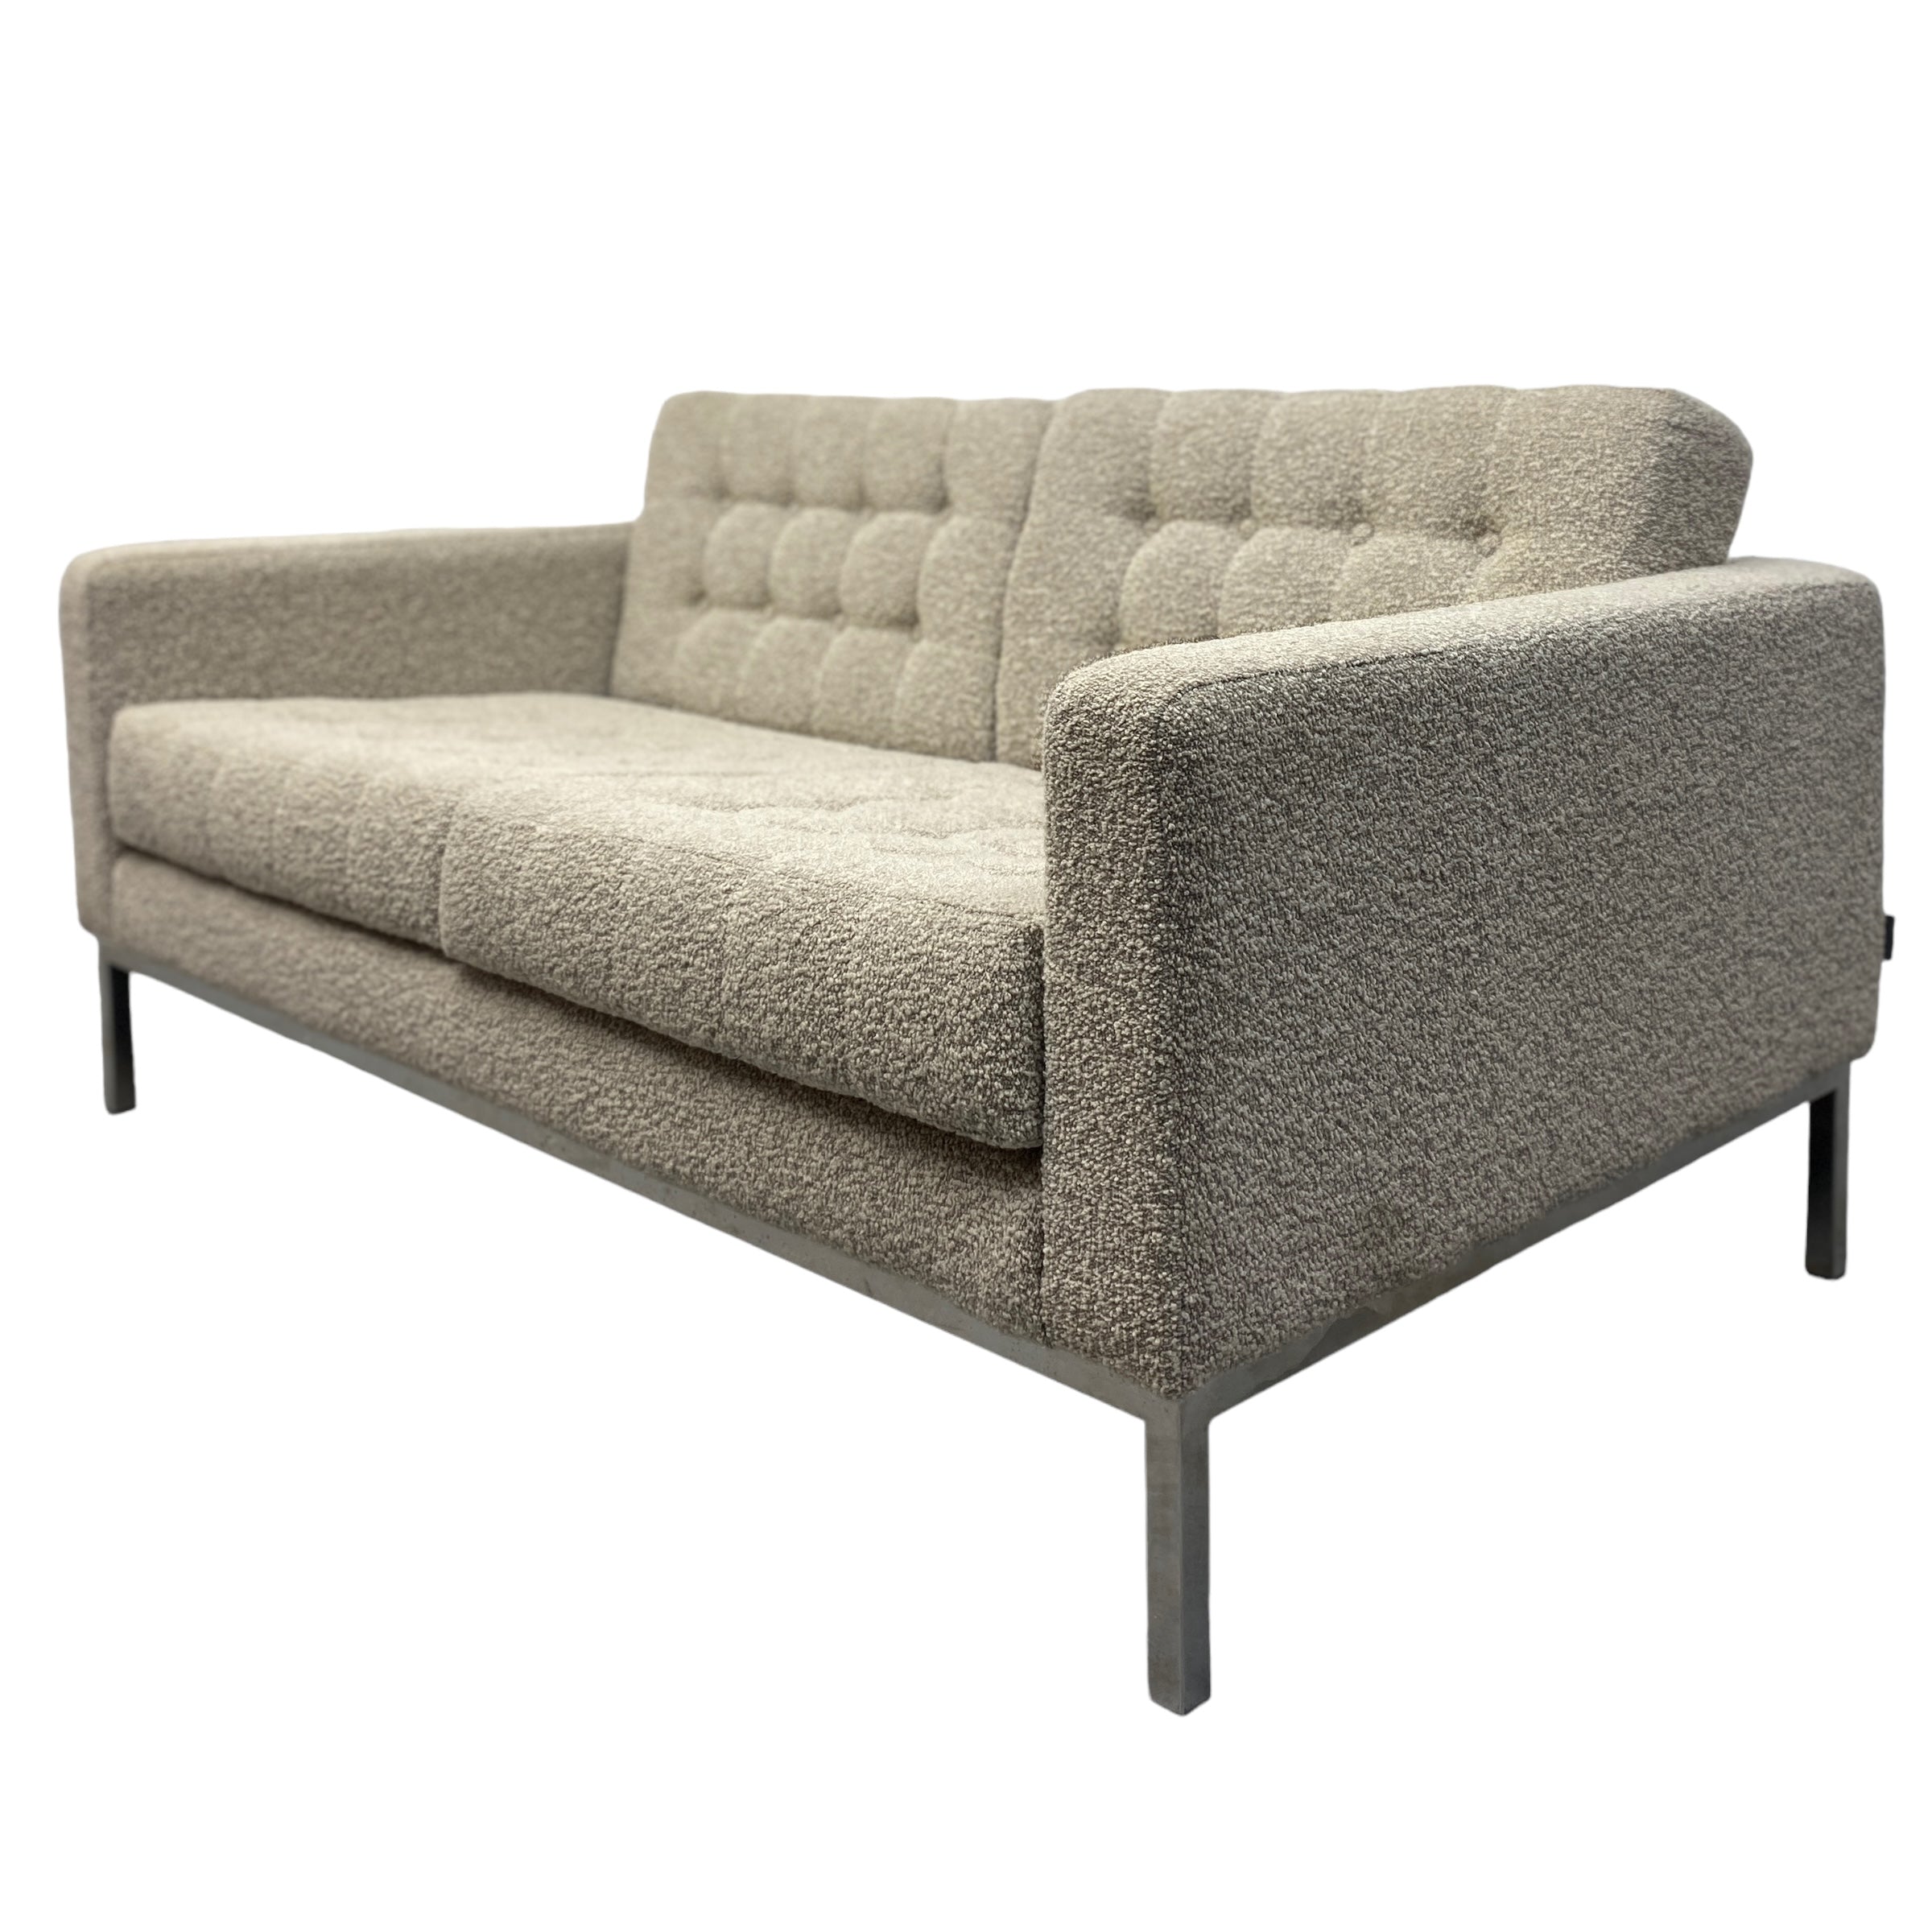 Beige Robin Day Sofa Midcentury Two Seater